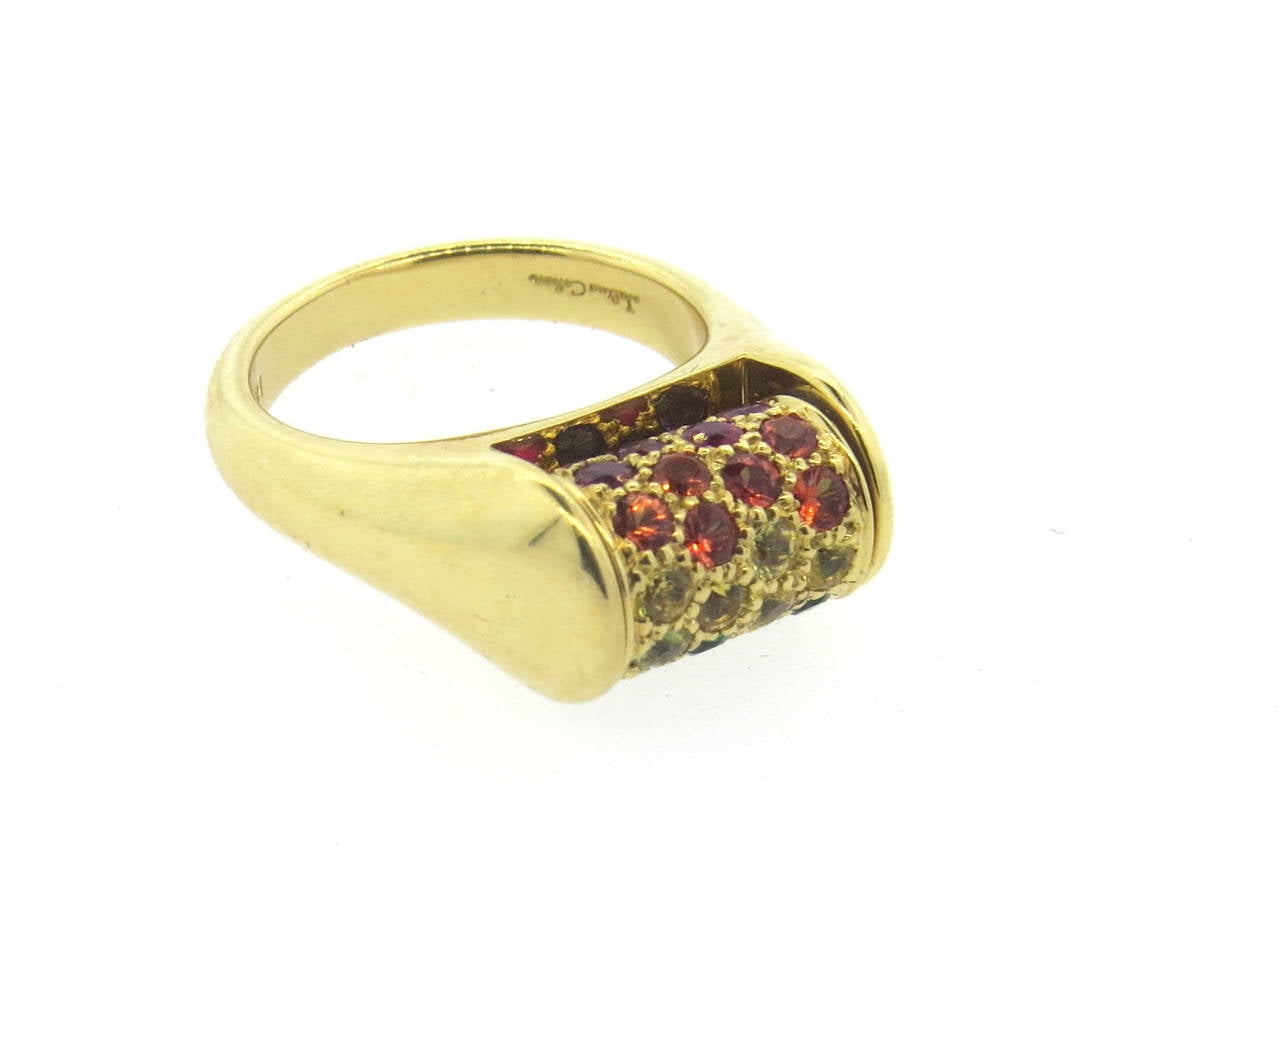 18k gold ring by Julius Cohen, featuring a rolling top, set with multicolor gemstones - sapphires, citrines, amethyst,tsavorite,ruby. Ring is a size 5, ring top is 8mm x 12mm, sits approximately 10mm from the finger. Marked 18k and Julius Cohen.